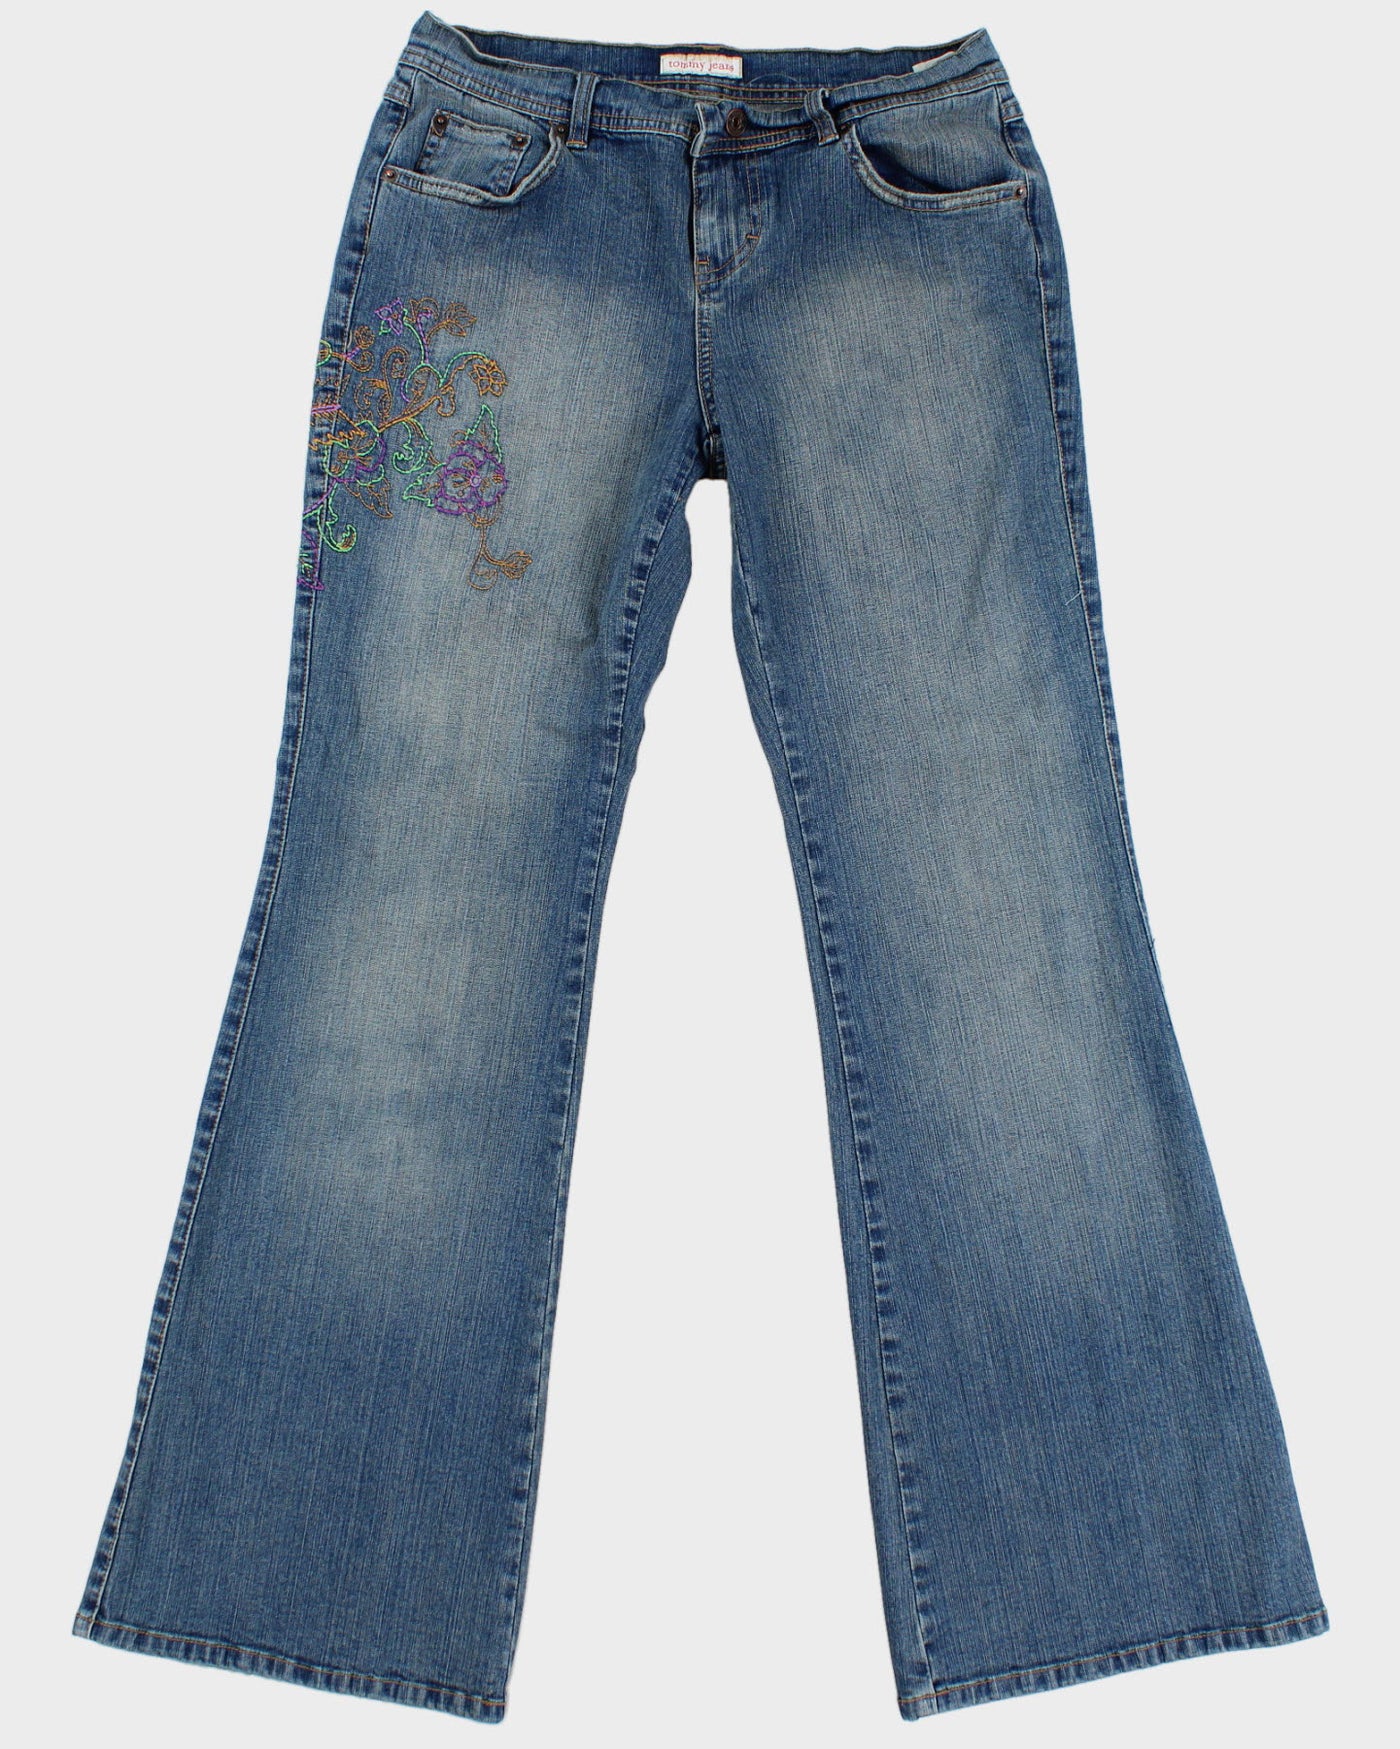 Y2K 00s Tommy Jeans Floral Embroidery Low Rise Denim Jeans - W30